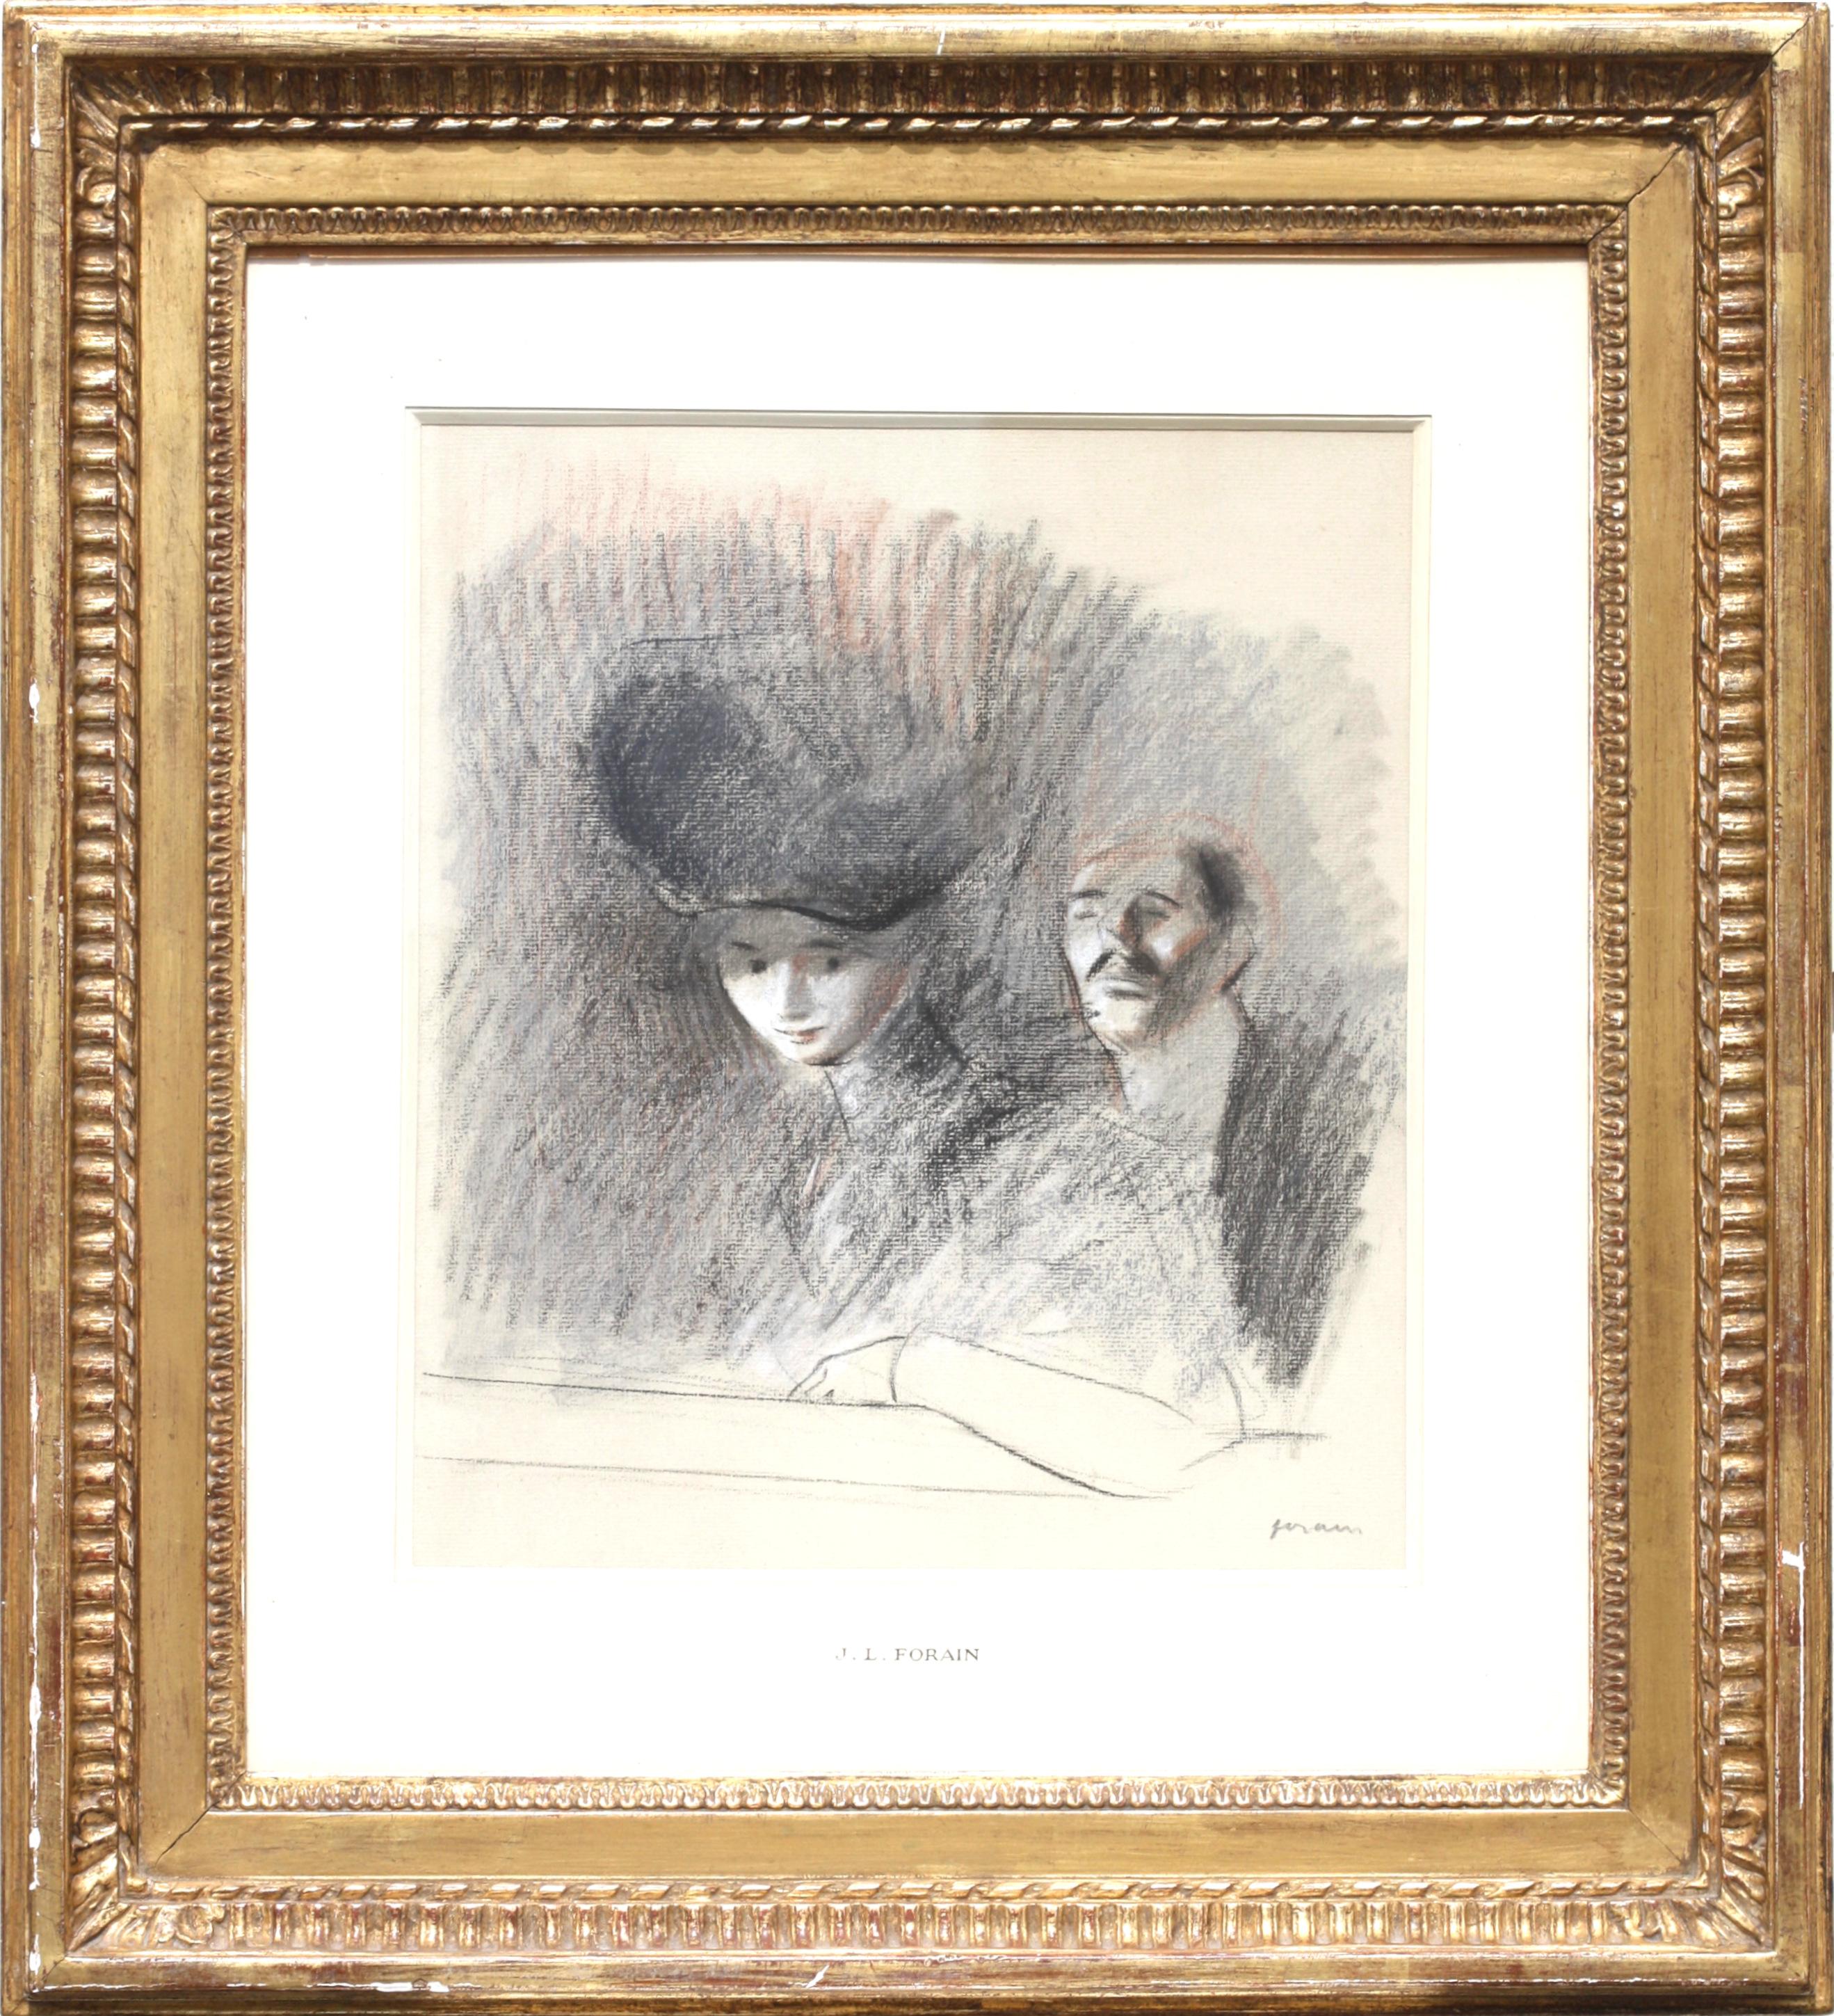 Jean-Louis Forain (1852-1931)
'At the Theater' 
graphite and colored chalk on paper
signed Forain (lower left)
Size with frame: Height 22.87 in. (58.10 cm.), Width 21 in. (53.34 cm.), 
Size without frame: Height 12.87 in. (32.70 cm.), Width